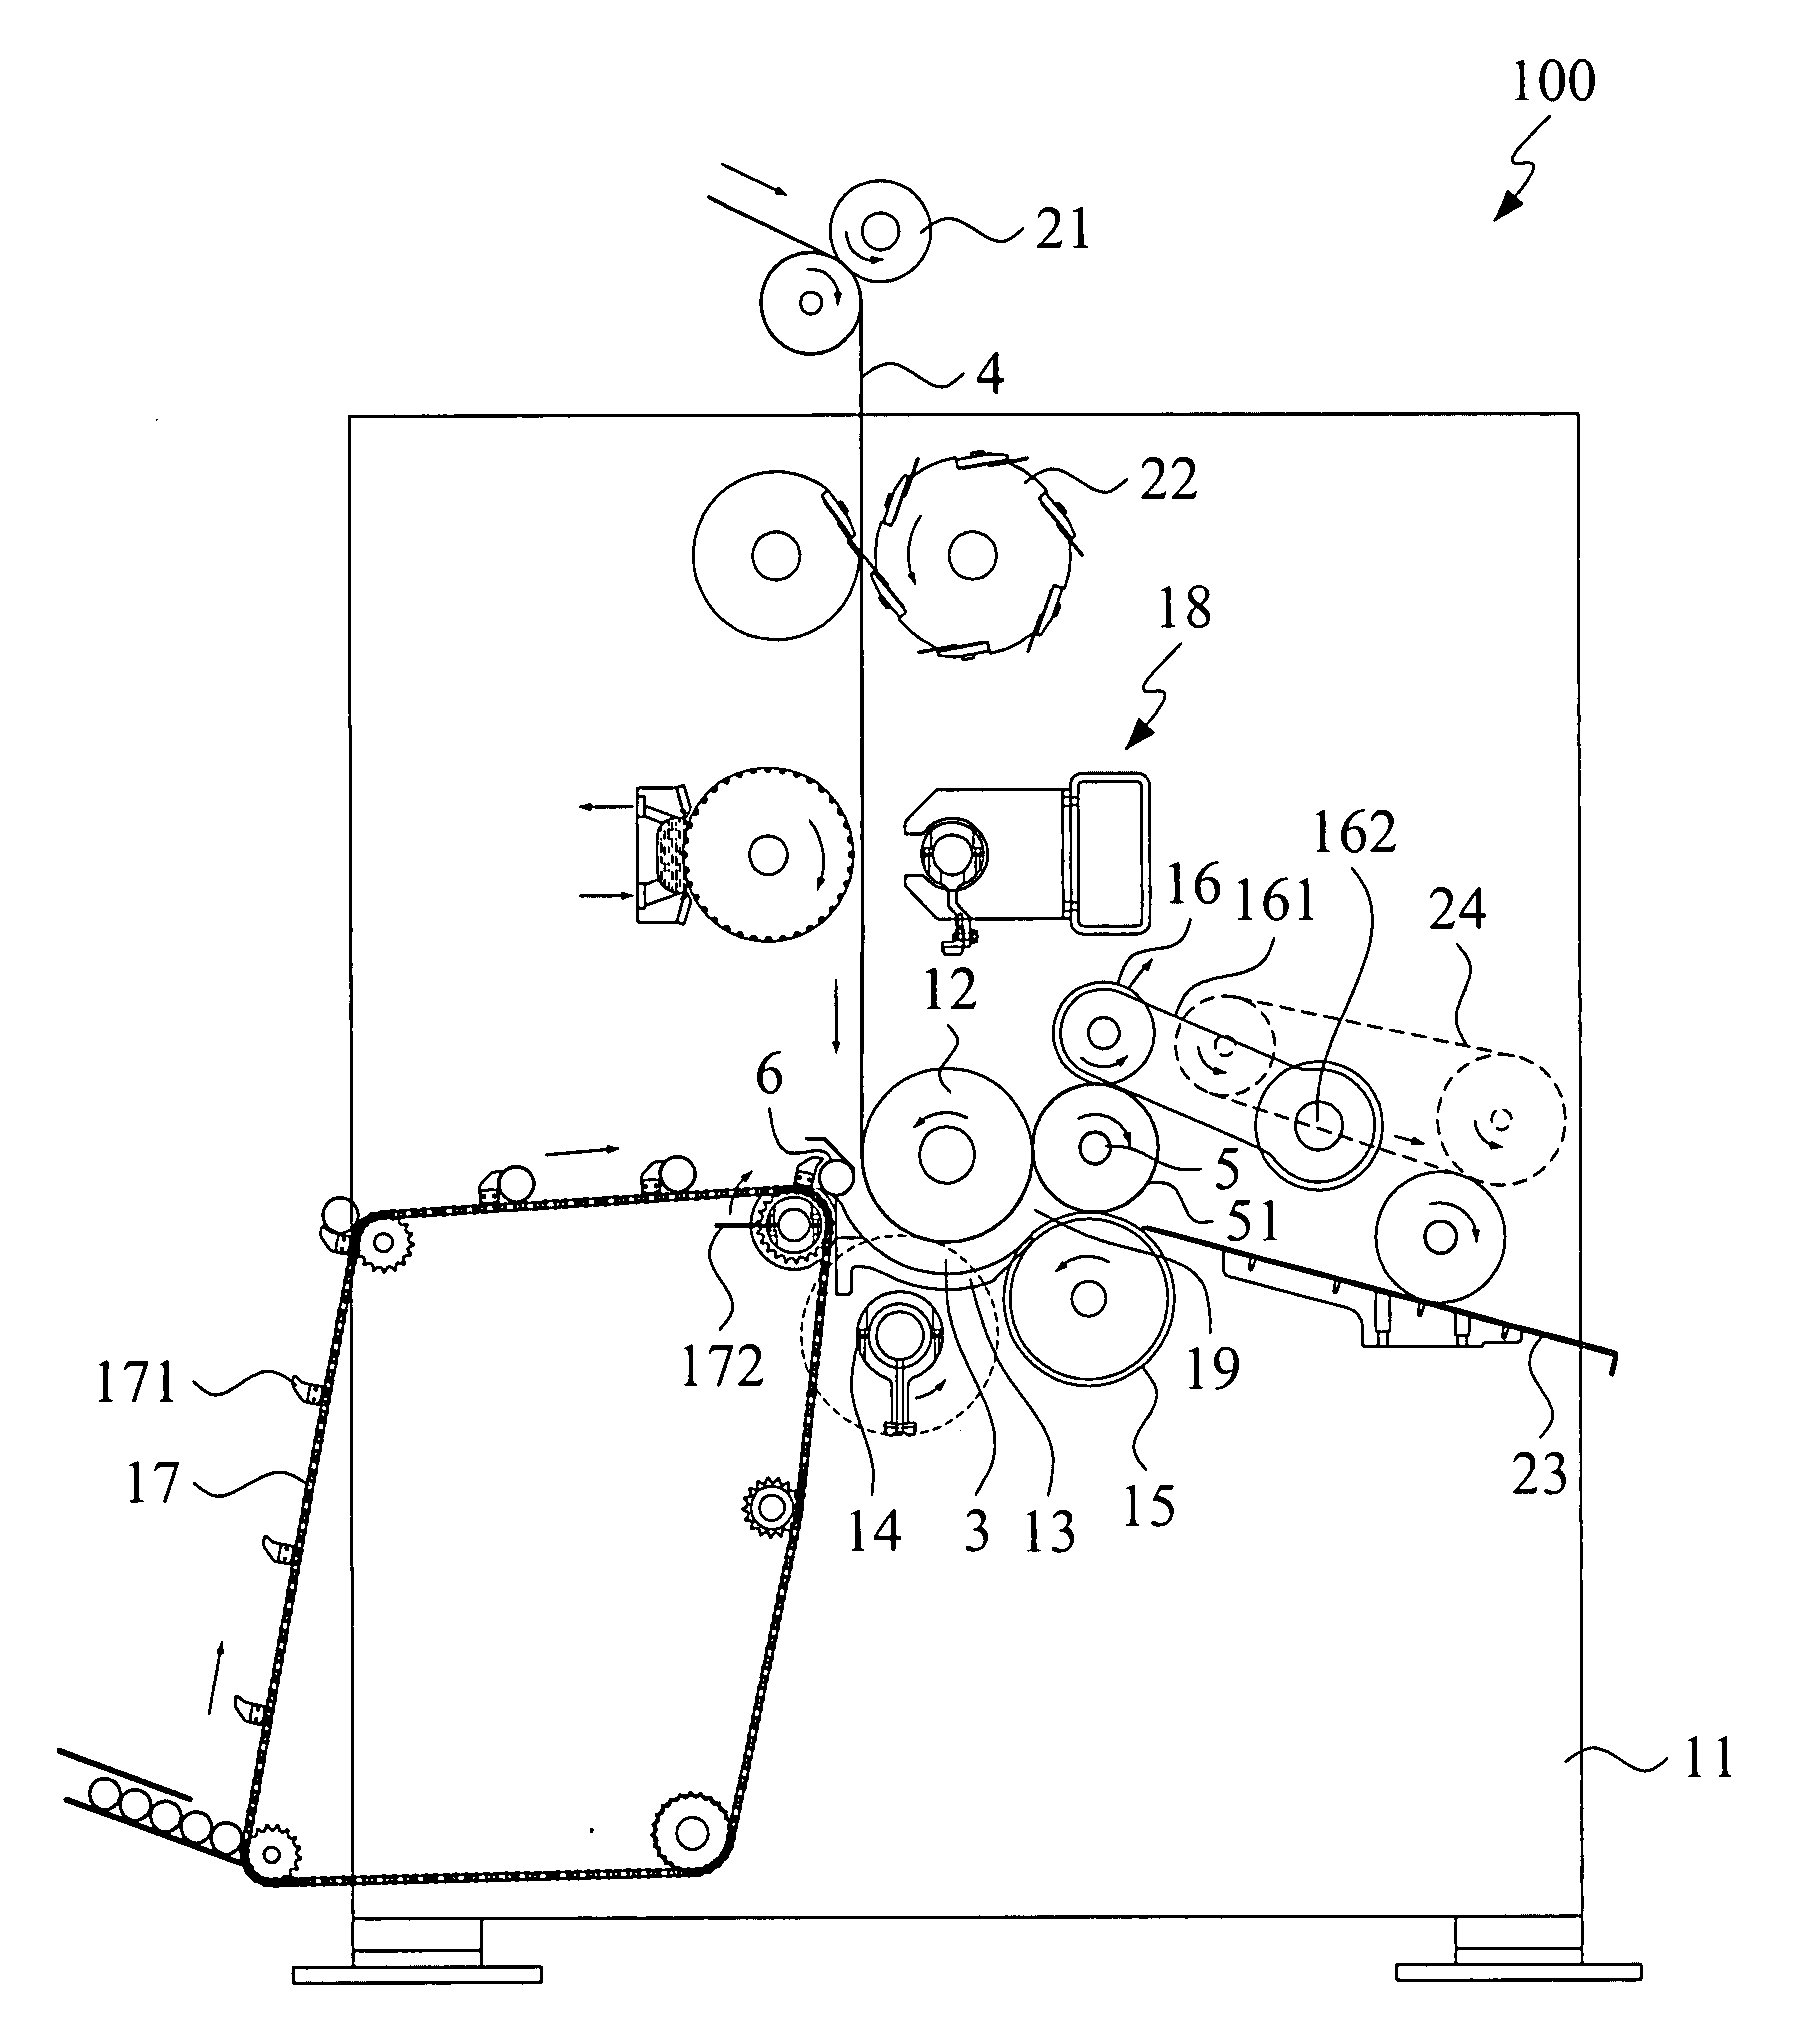 Web separator with reverse rotation mechanism for tissue paper winding machine